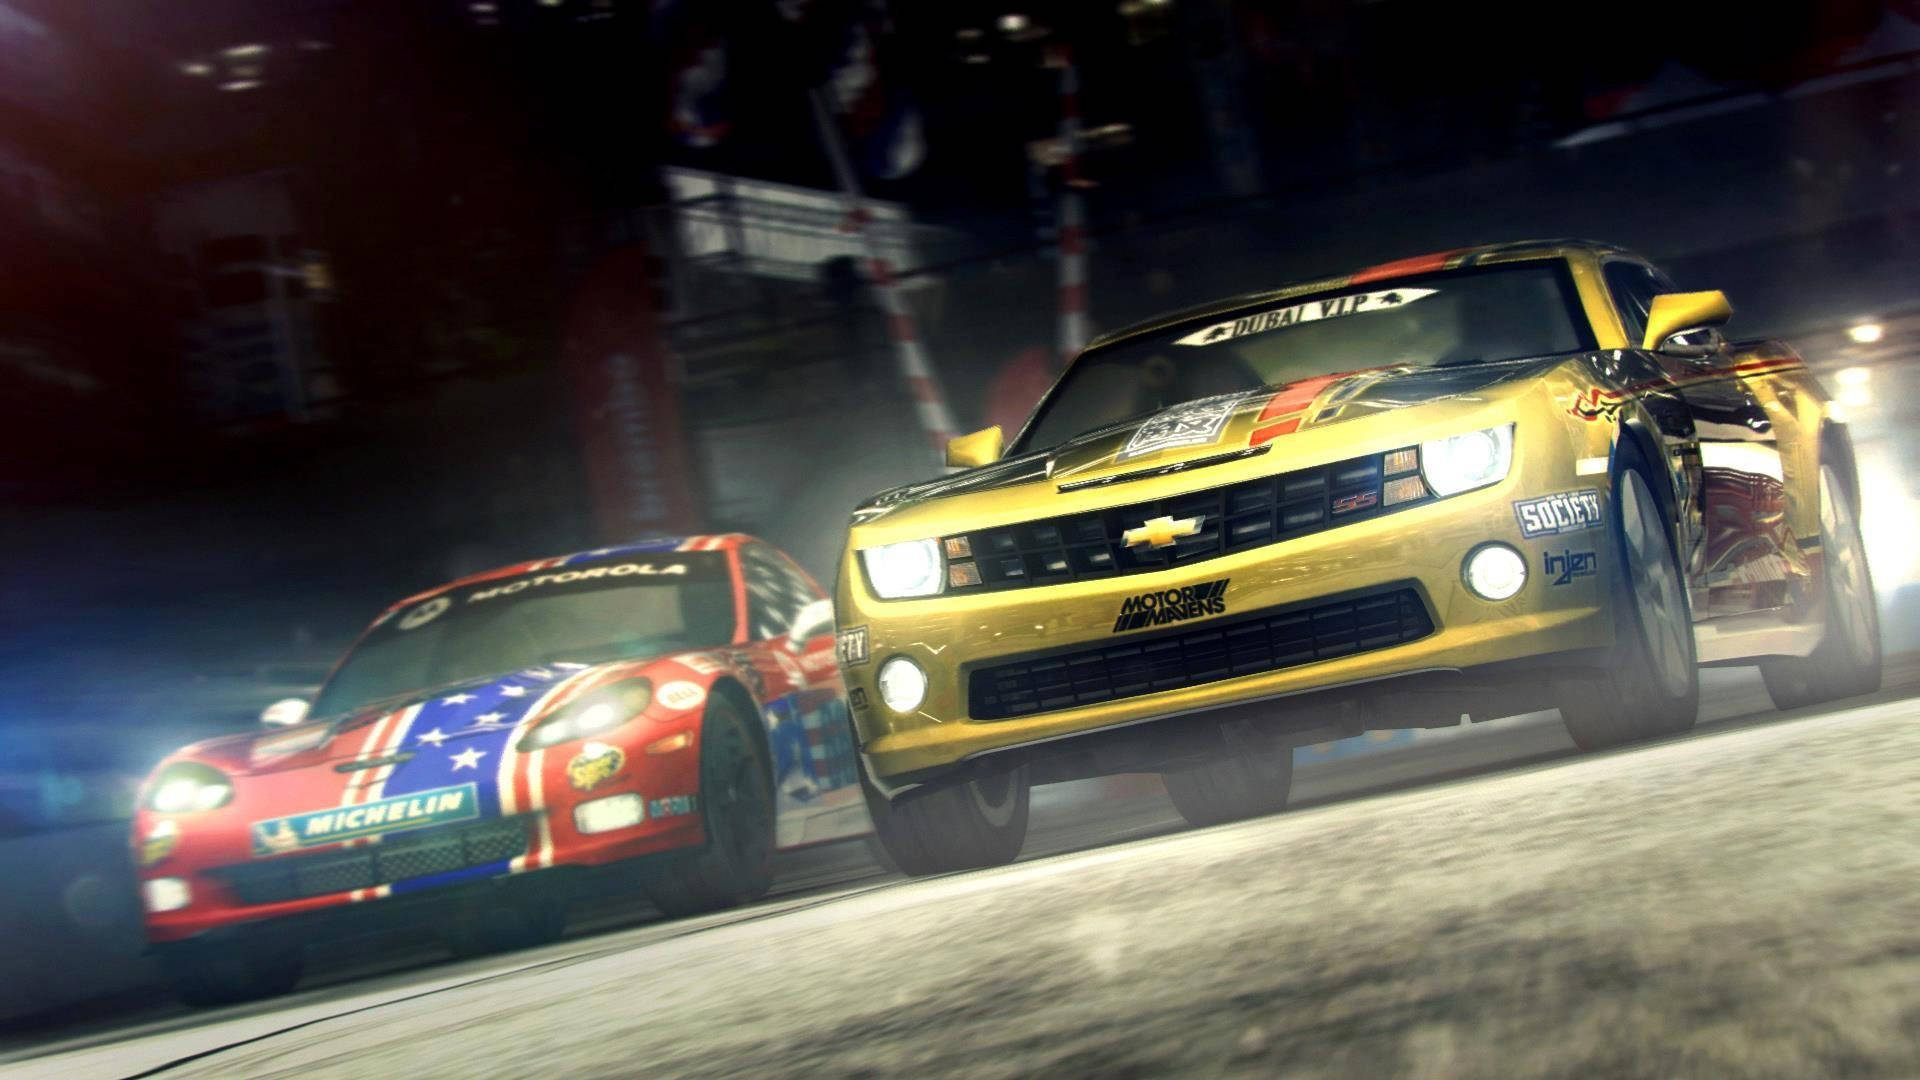 Exciting Grid 2 Racing Action Featuring Yellow And Red Cars Background